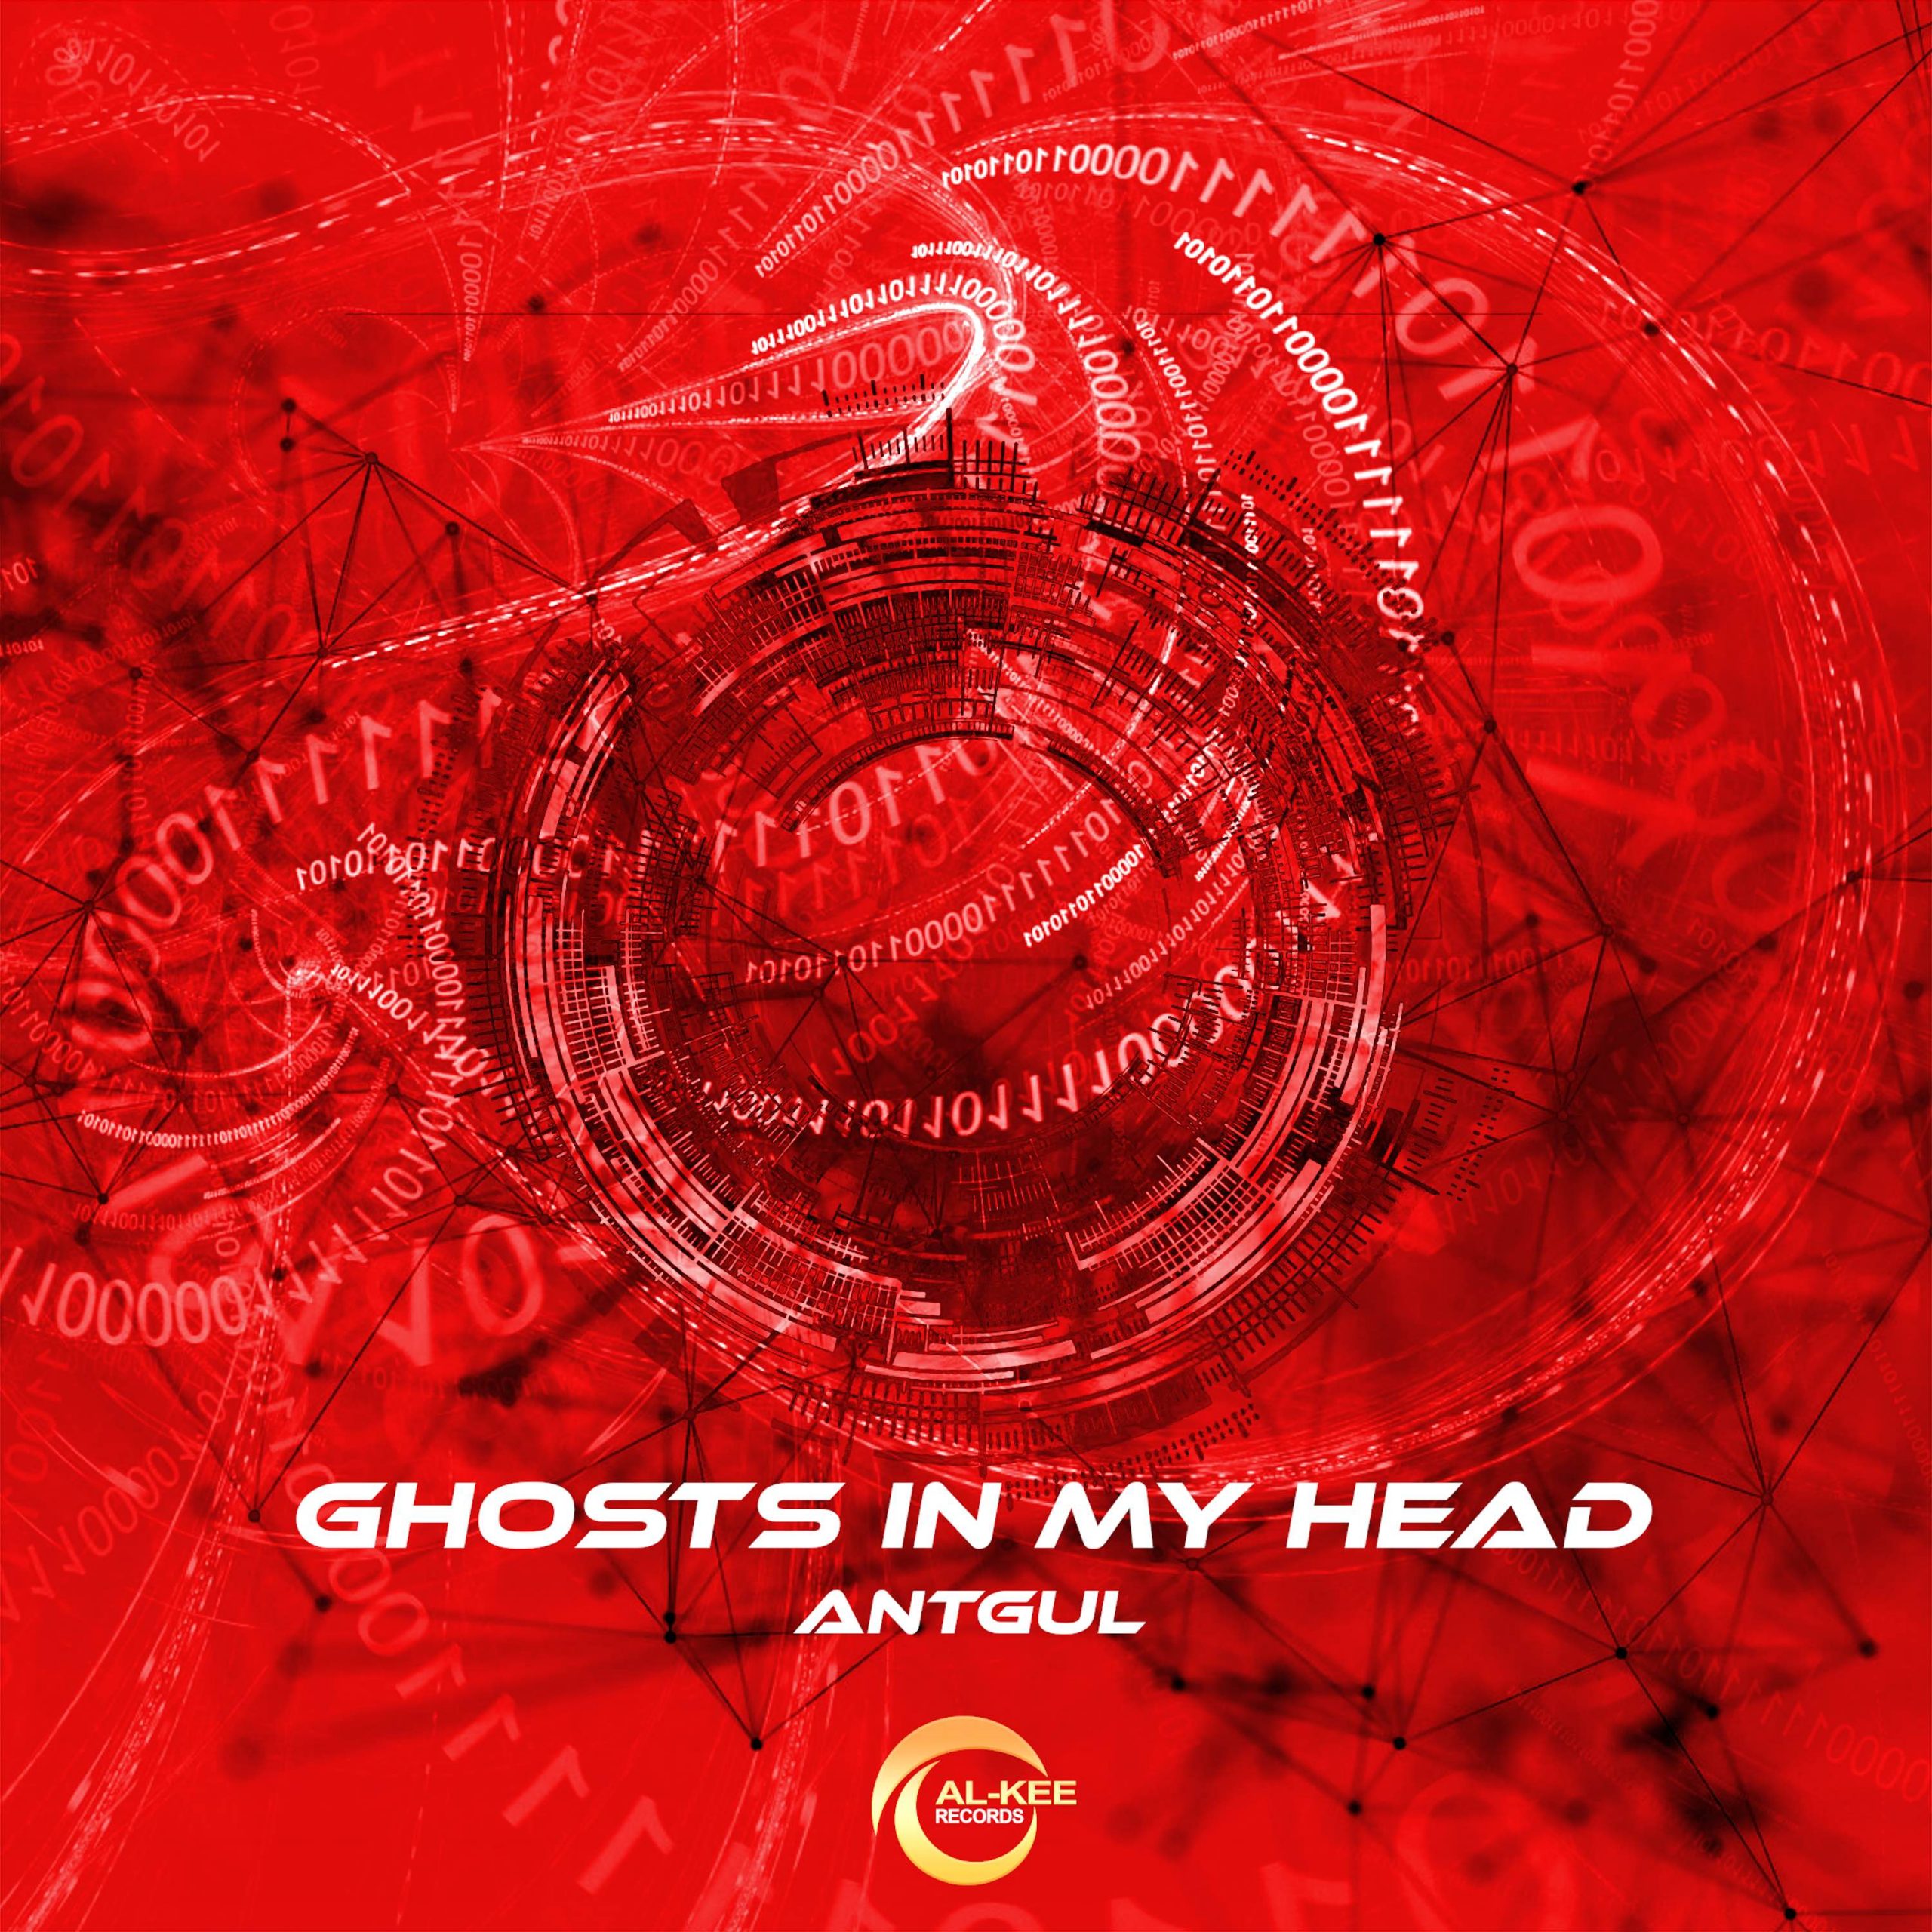 ghosts in my head and they wont go